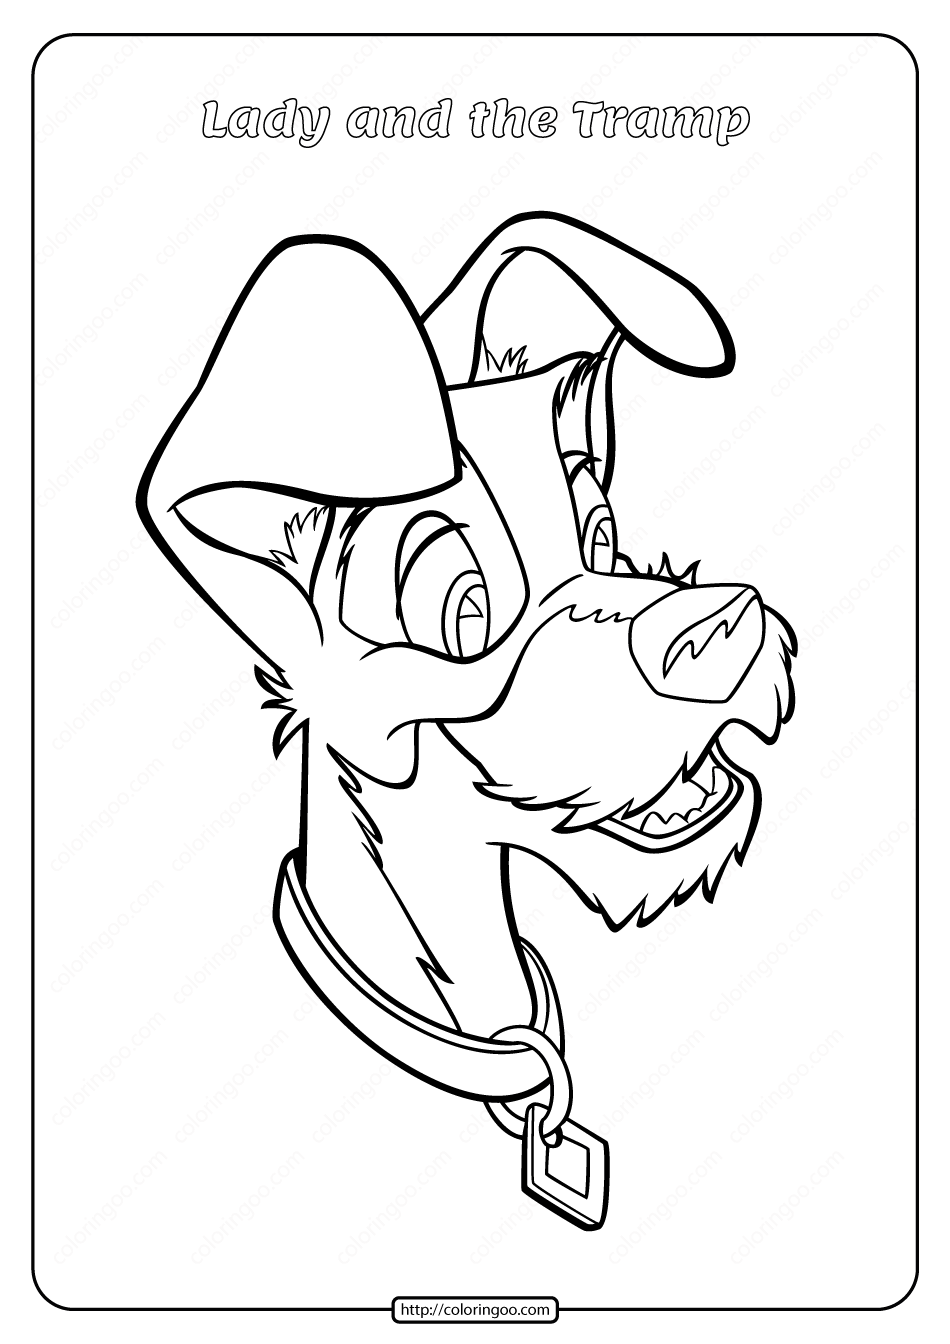 Printable Lady and the Tramp Coloring Page 03